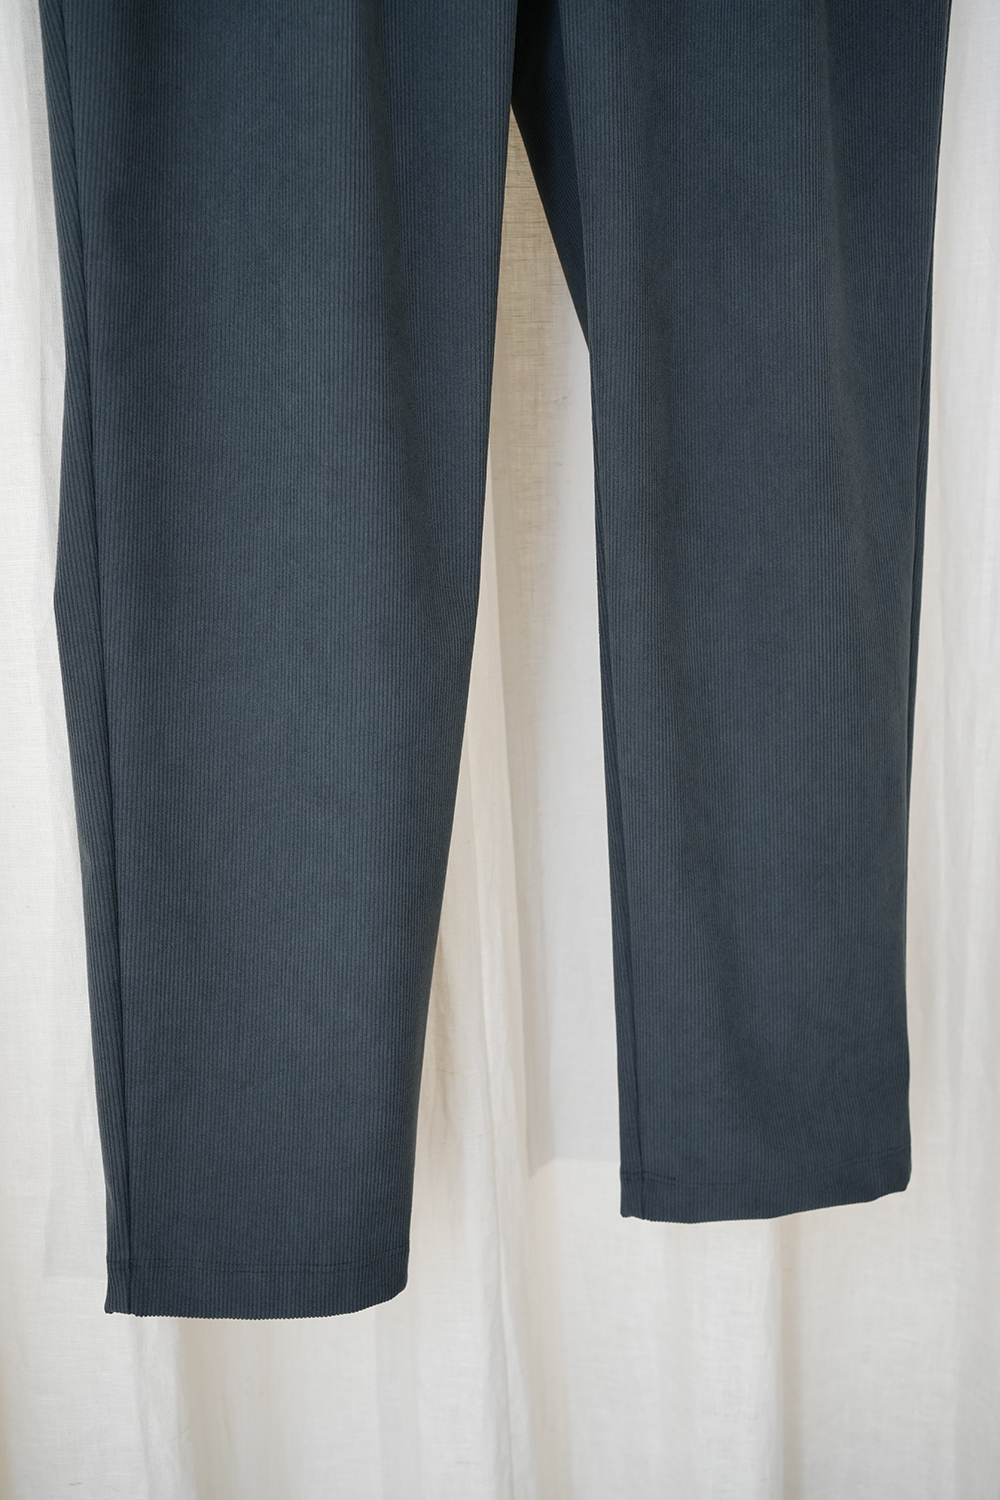 TRICOT CORDUROY TAPERED PANTS | ANOTHER LOUNGE